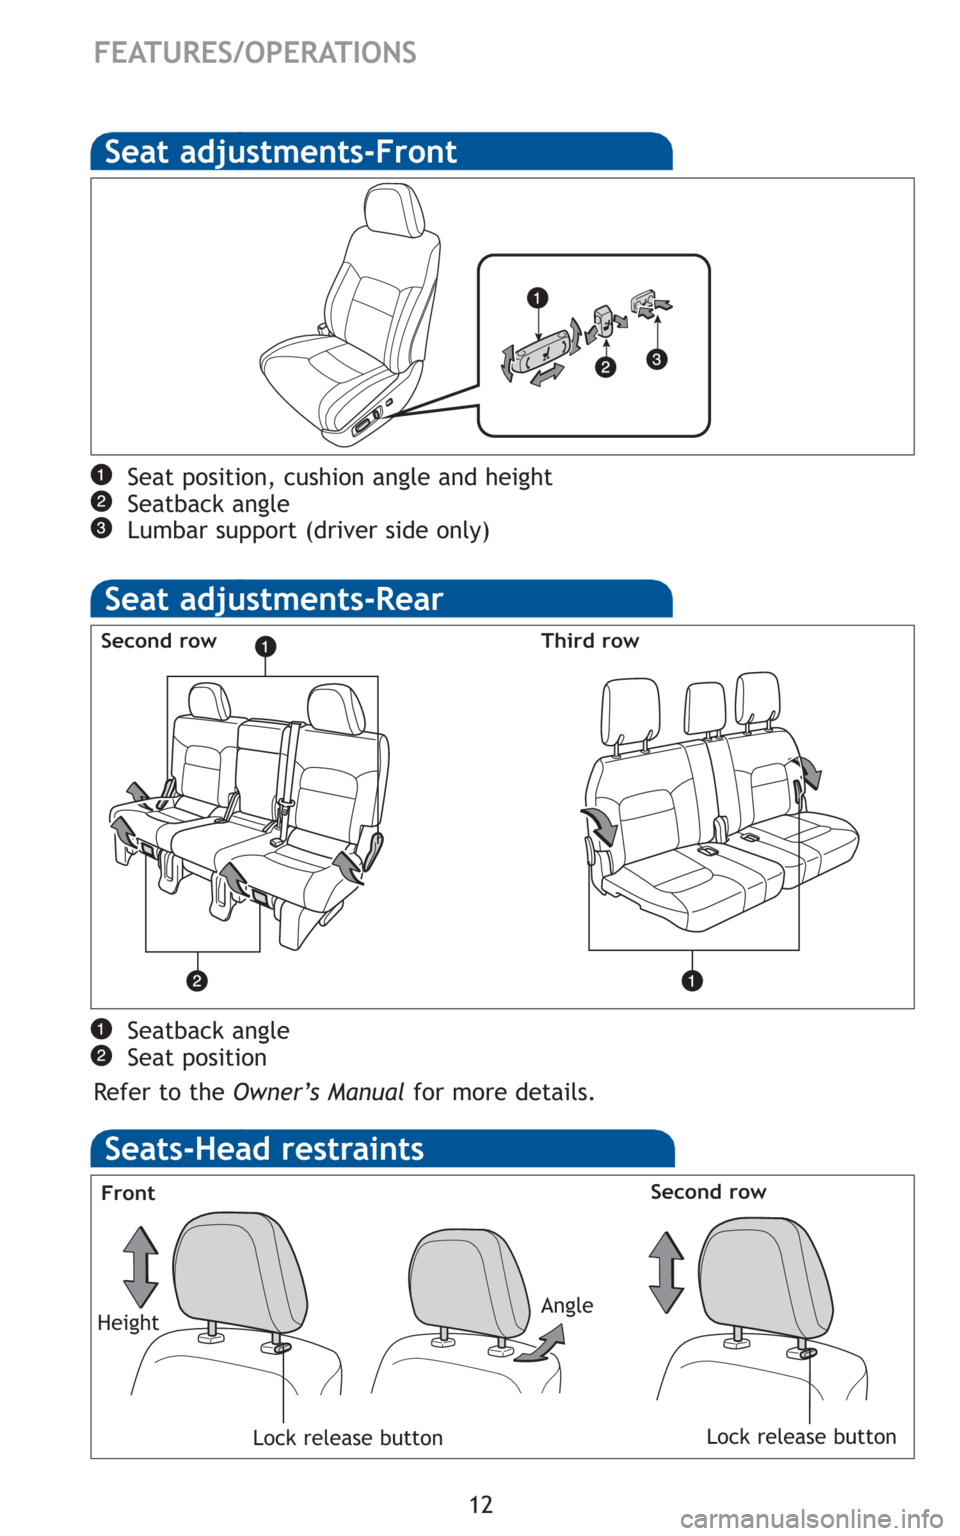 TOYOTA LAND CRUISER 2010 J200 Quick Reference Guide 12
FEATURES/OPERATIONS
Seat adjustments-Rear
Seatback angle
Seat position
Refer to the Owner’s Manualfor more details.
Seat adjustments-Front
Seat position, cushion angle and height
Seatback angle
L